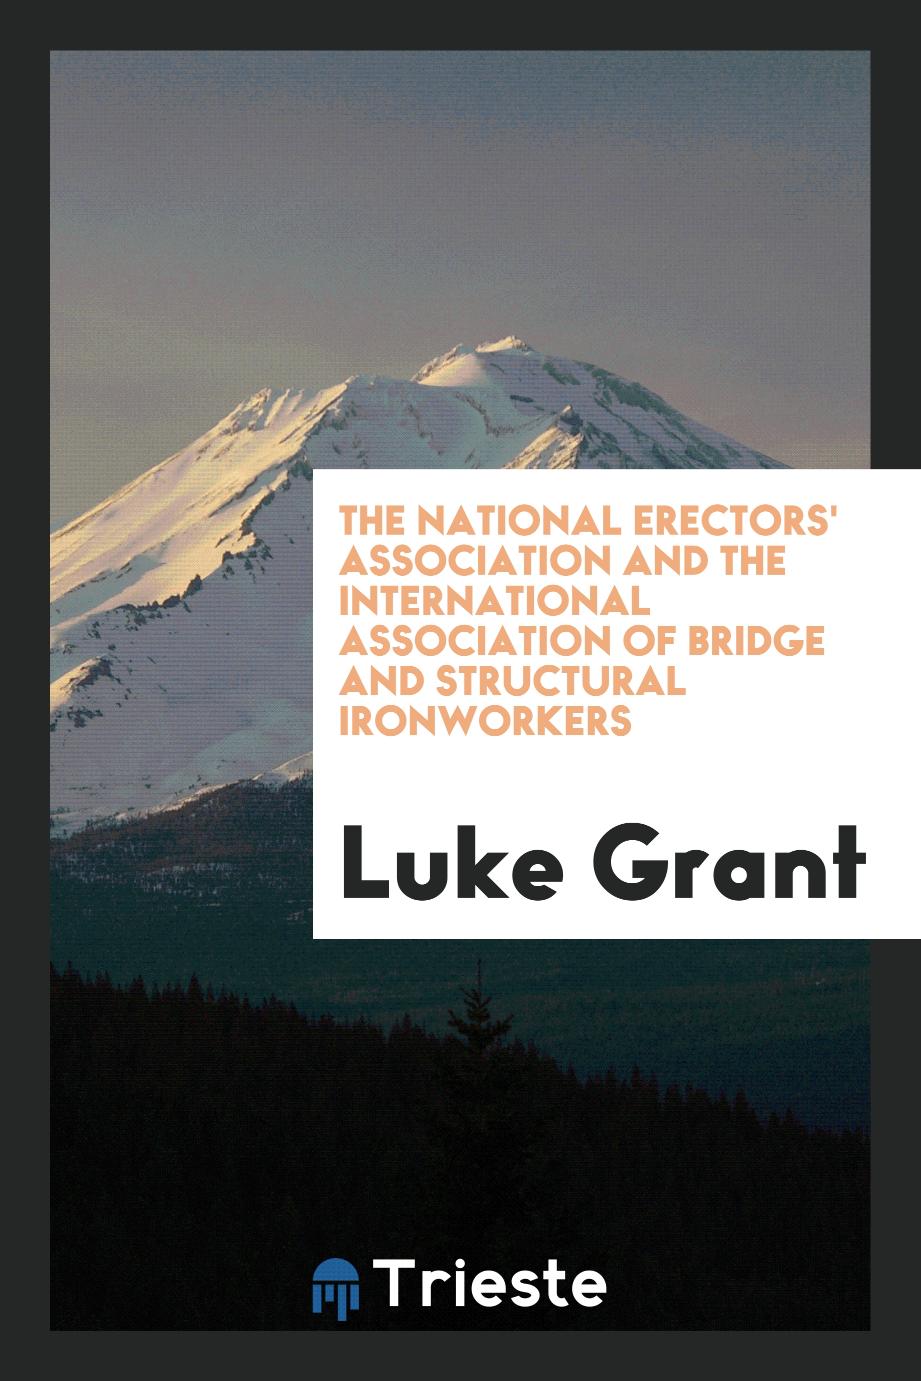 The National Erectors' Association and the International Association of Bridge and Structural Ironworkers